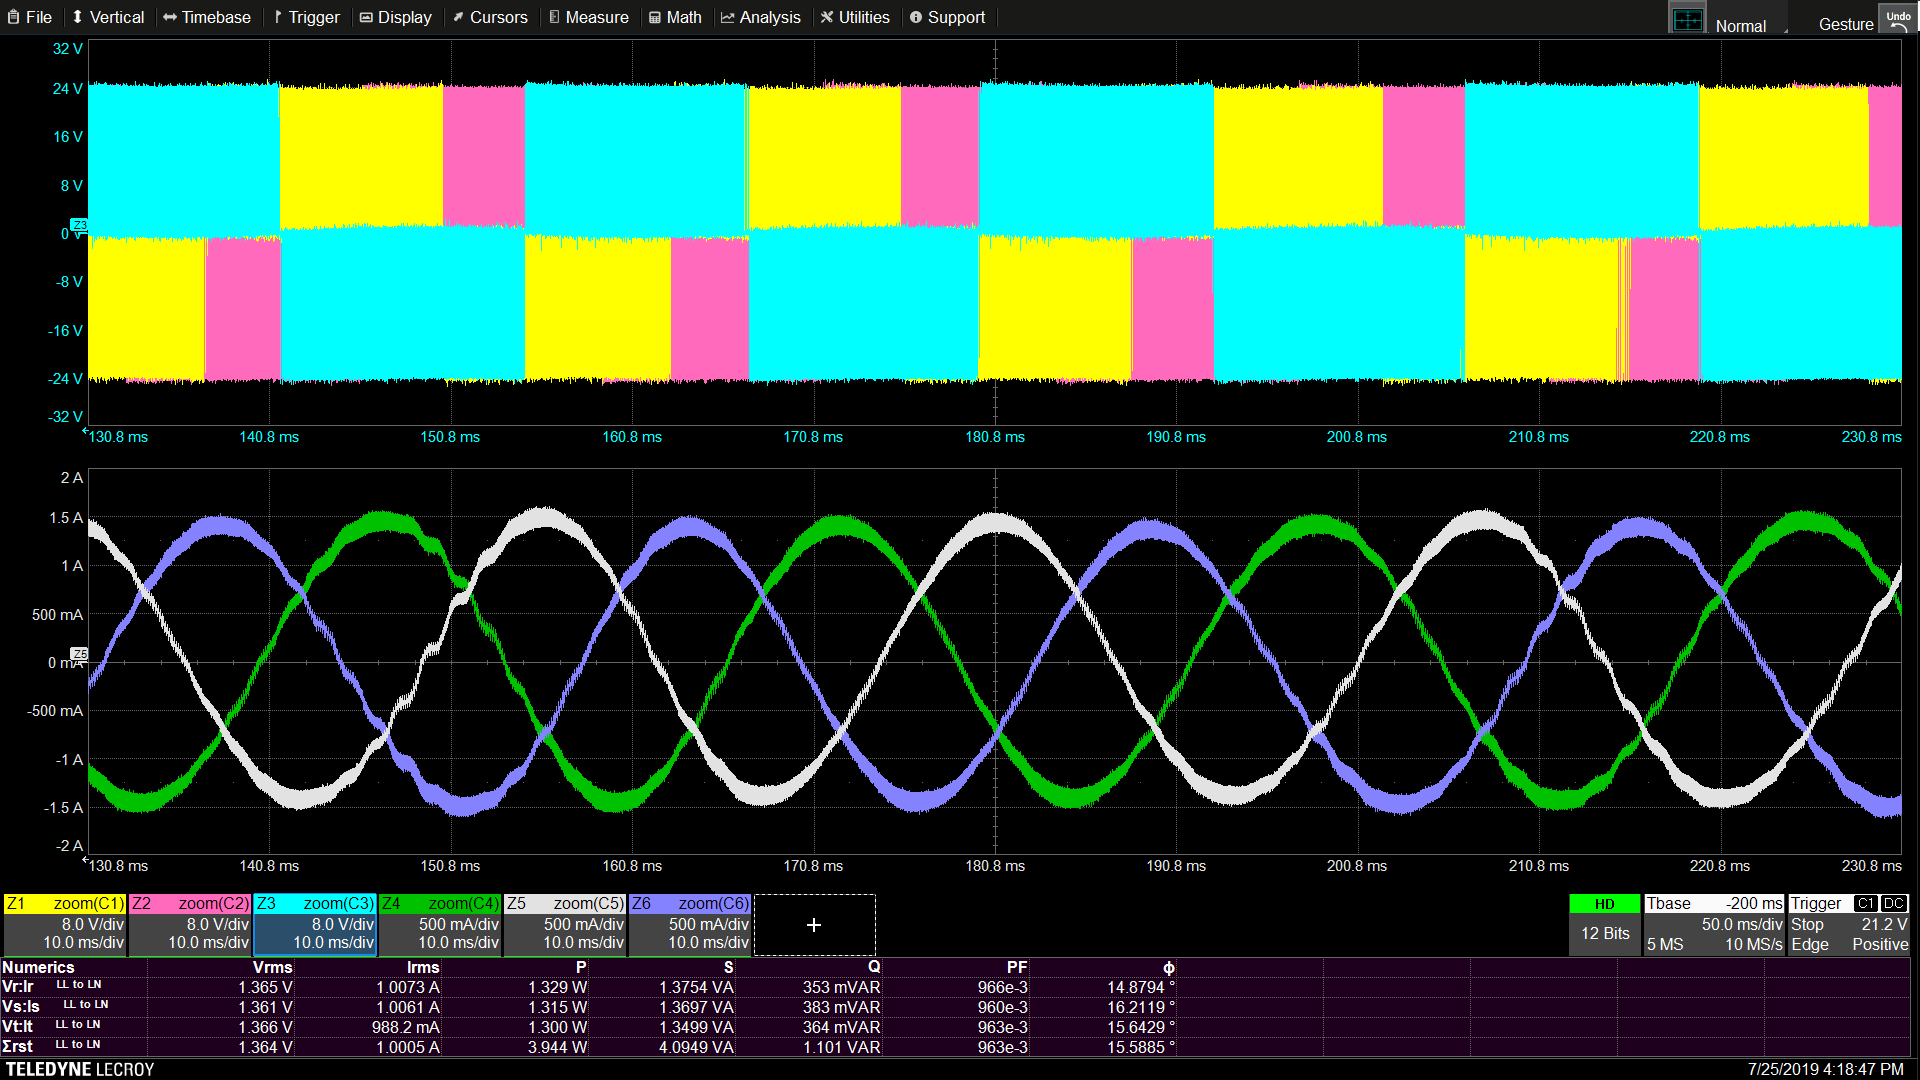 Teledyne LeCroy - MAUI Studio - Remote and Offline PC Analysis Software for  an Oscilloscope